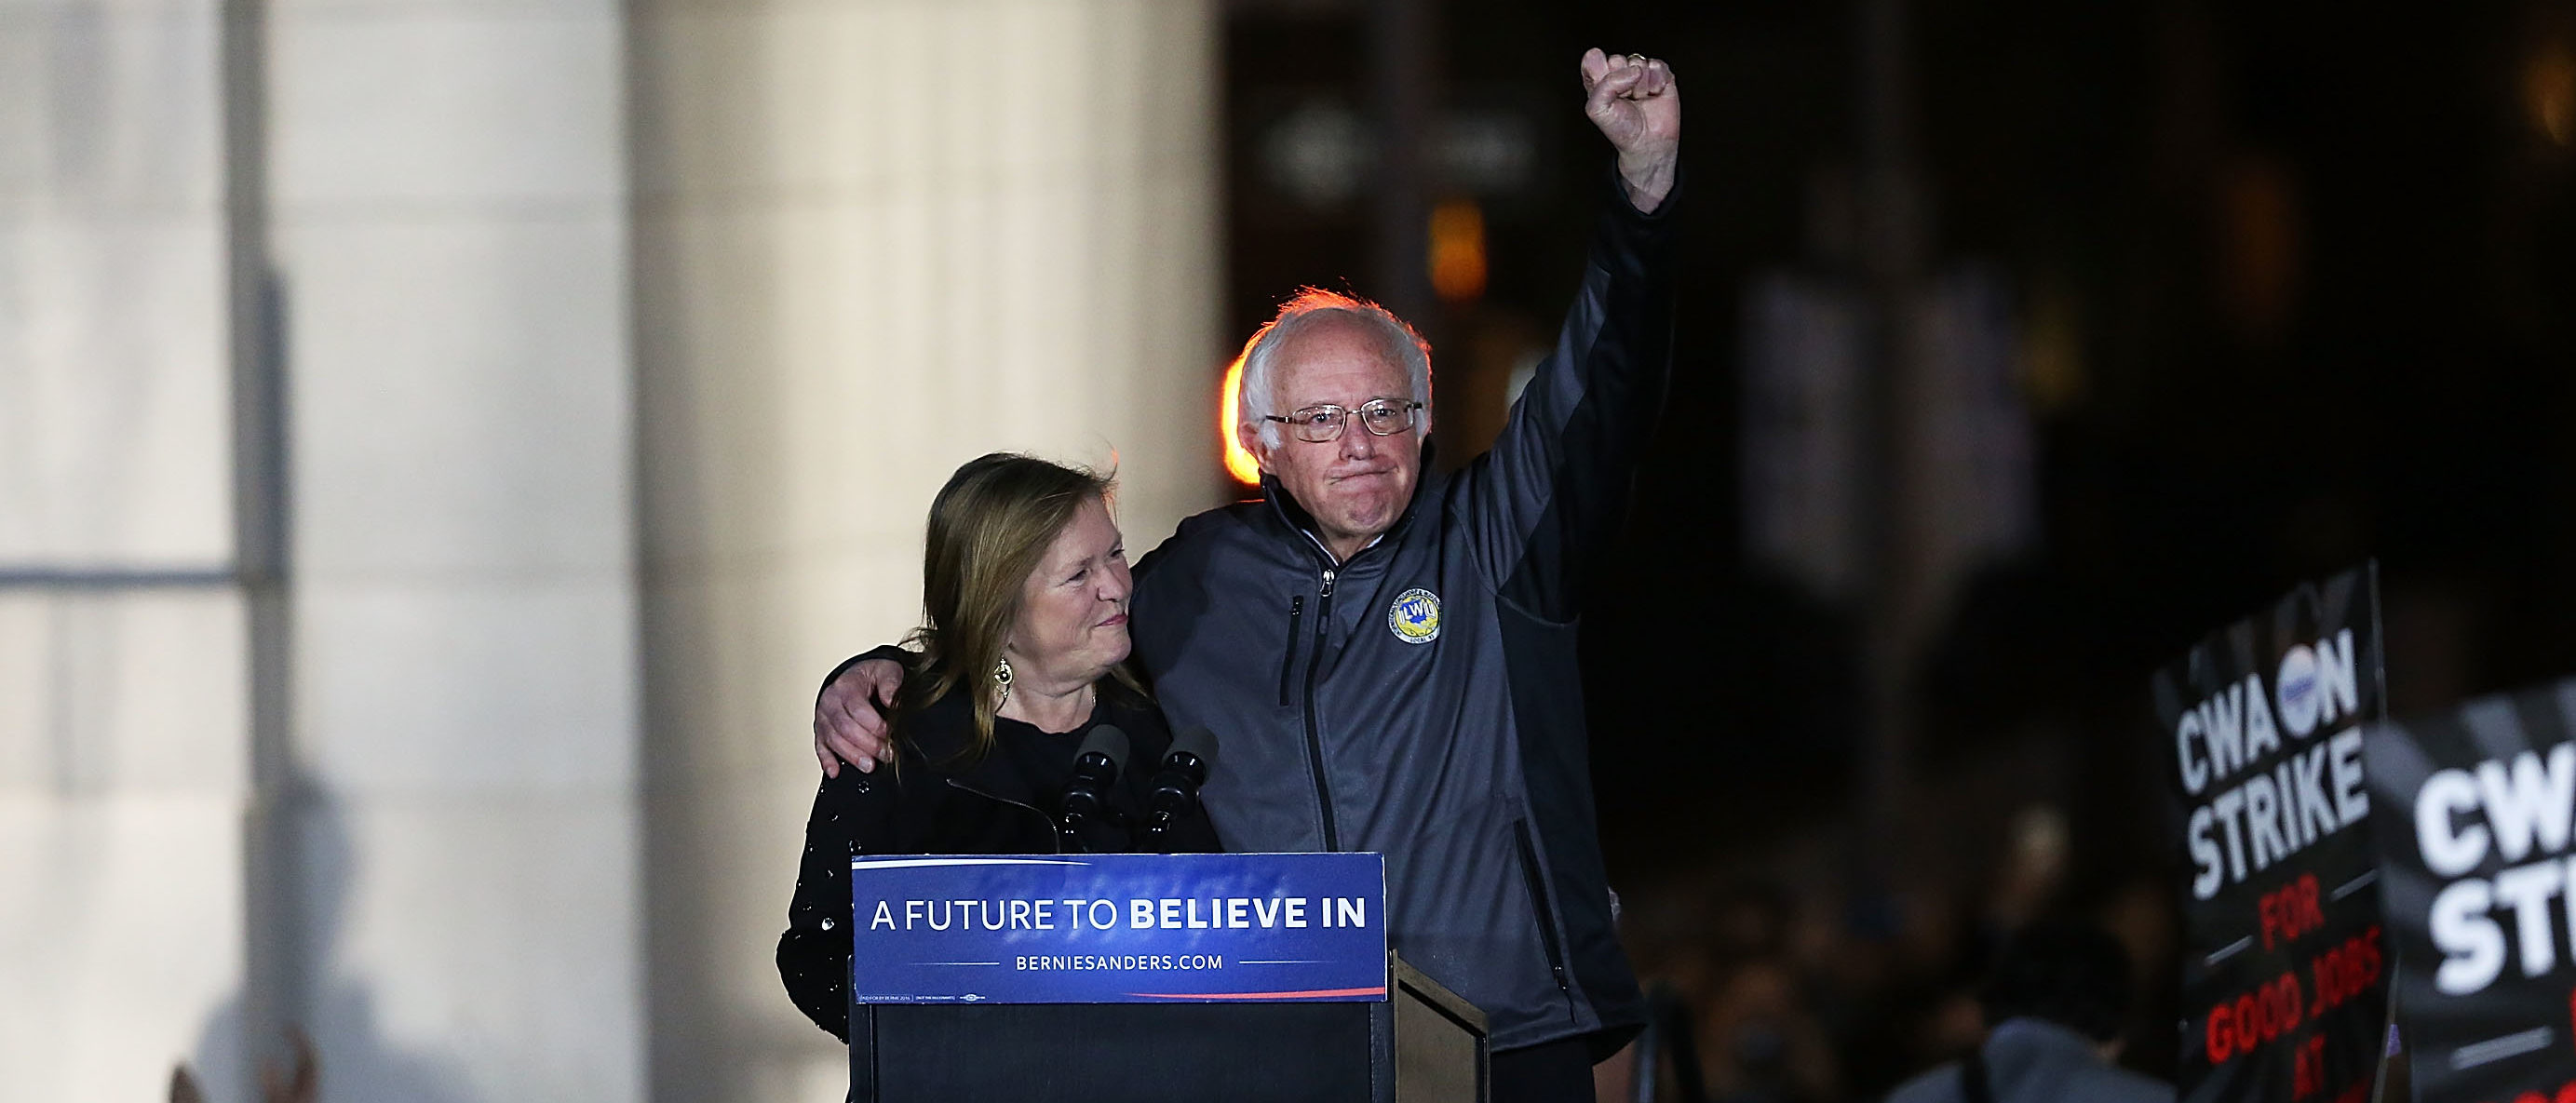 NEW YORK, NEW YORK - APRIL 13: Democratic Presidential candidate Bernie Sanders stands on stage with his wife Jane O'Meara Sanders before speaking to thousands of people at a rally for in New York CityÕs historic Washington Square Park on April 13, 2016 in New York City. While Sanders is still significantly behind Hillary Clinton in the delegate count, he continues to run a spirited campaign that has resonated with young and liberal voters. (Photo by Spencer Platt/Getty Images)